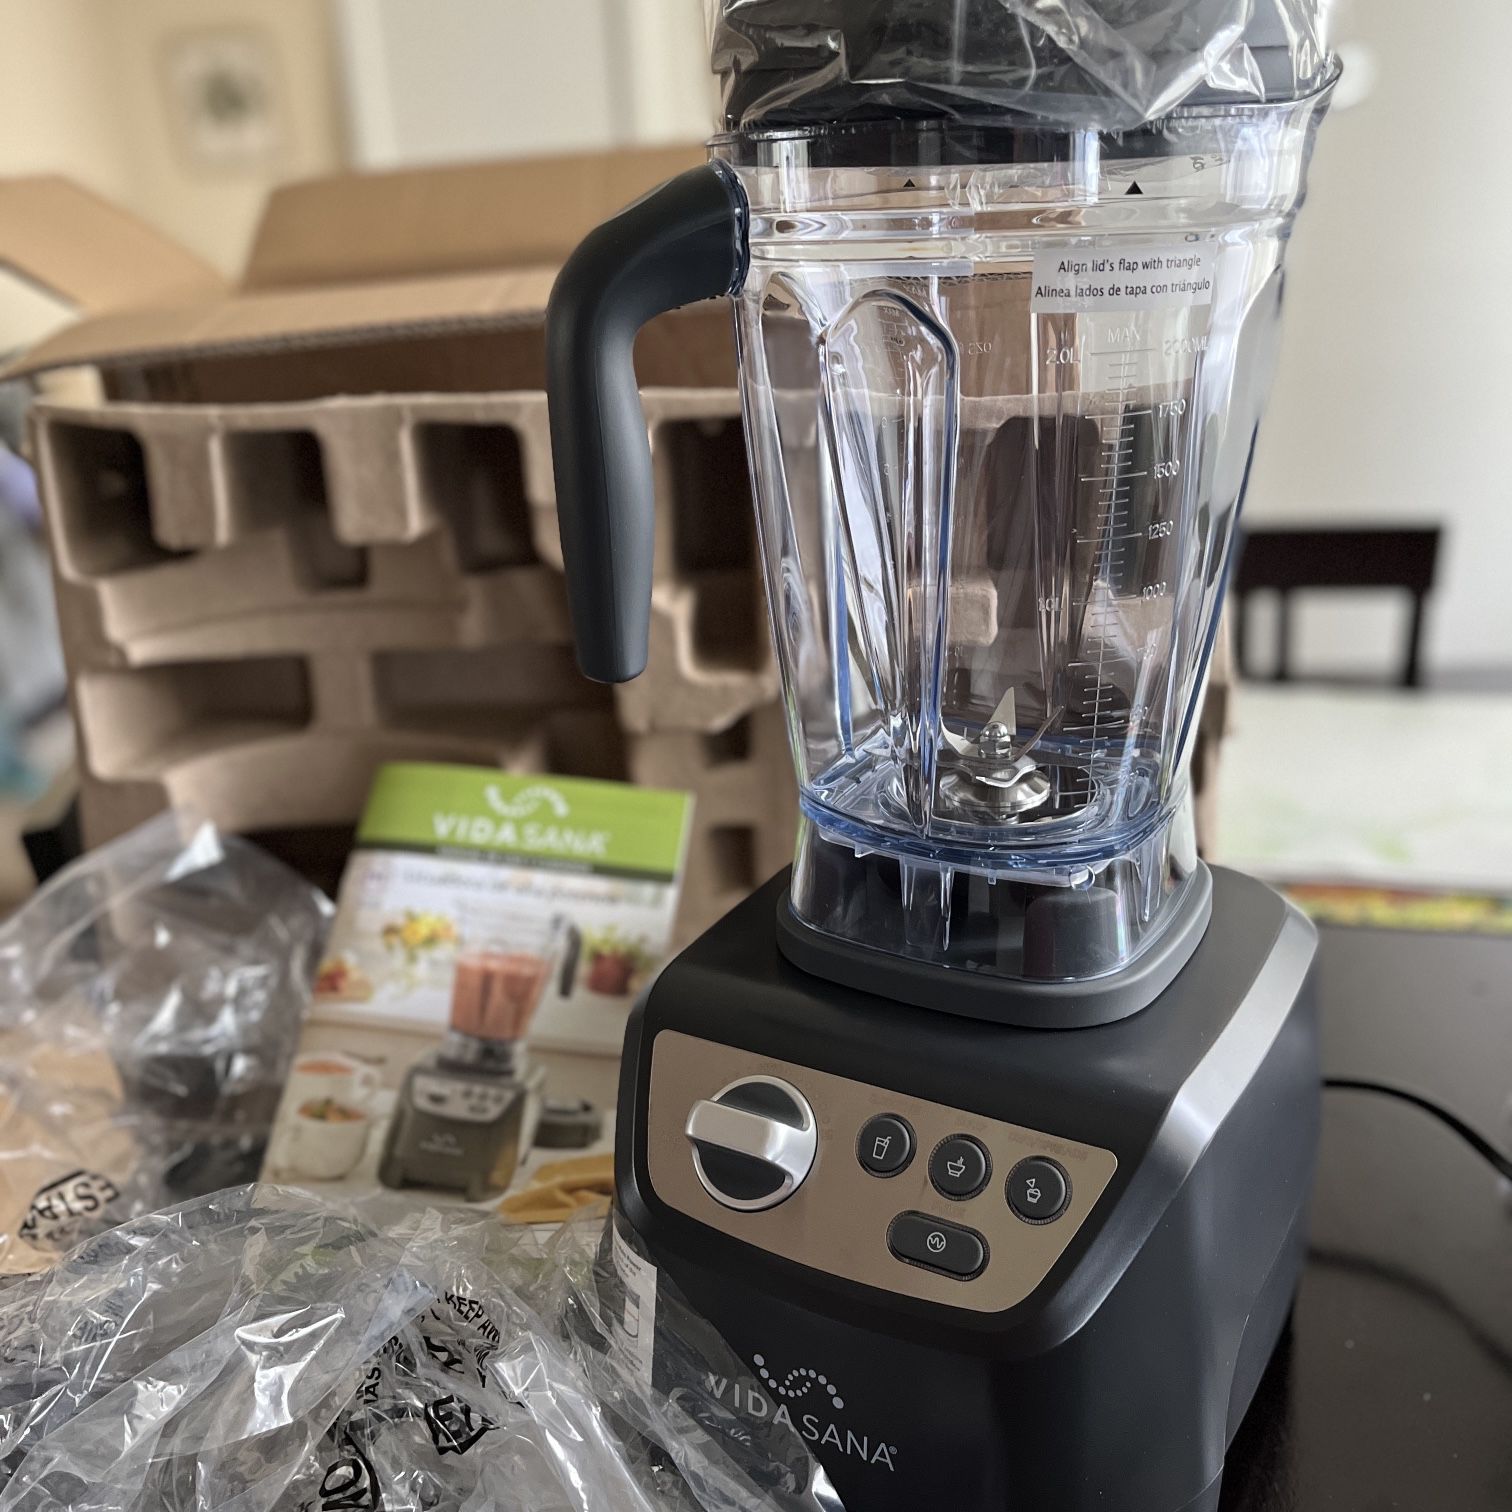 Princess House Blender/licuadora for Sale in Sedro-woolley, WA - OfferUp